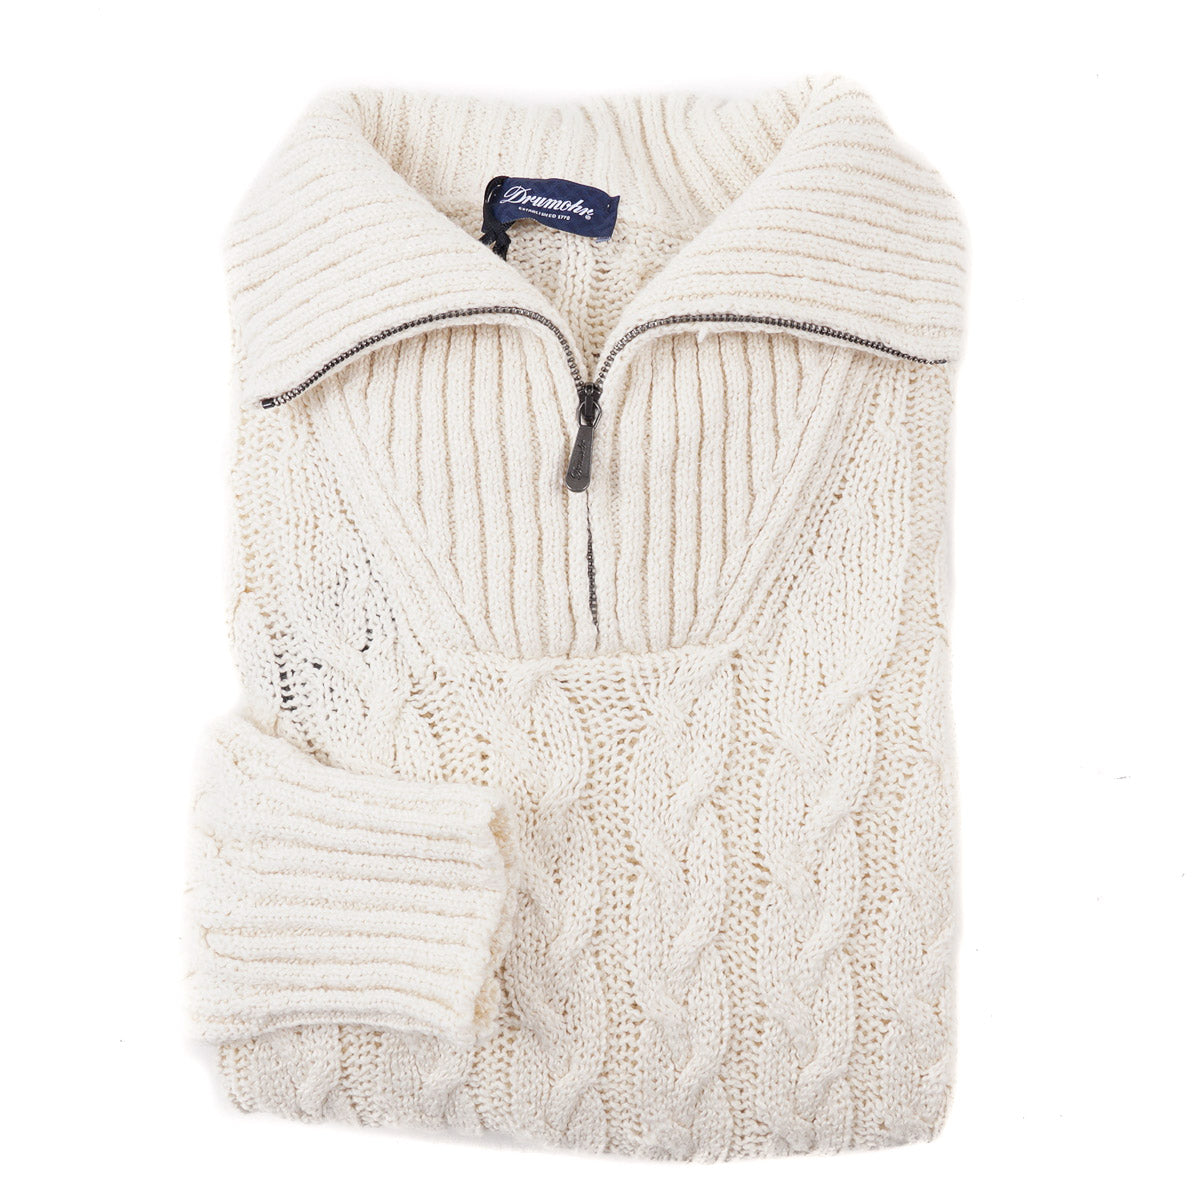 Drumohr Cable Knit Fisherman's Sweater - Top Shelf Apparel